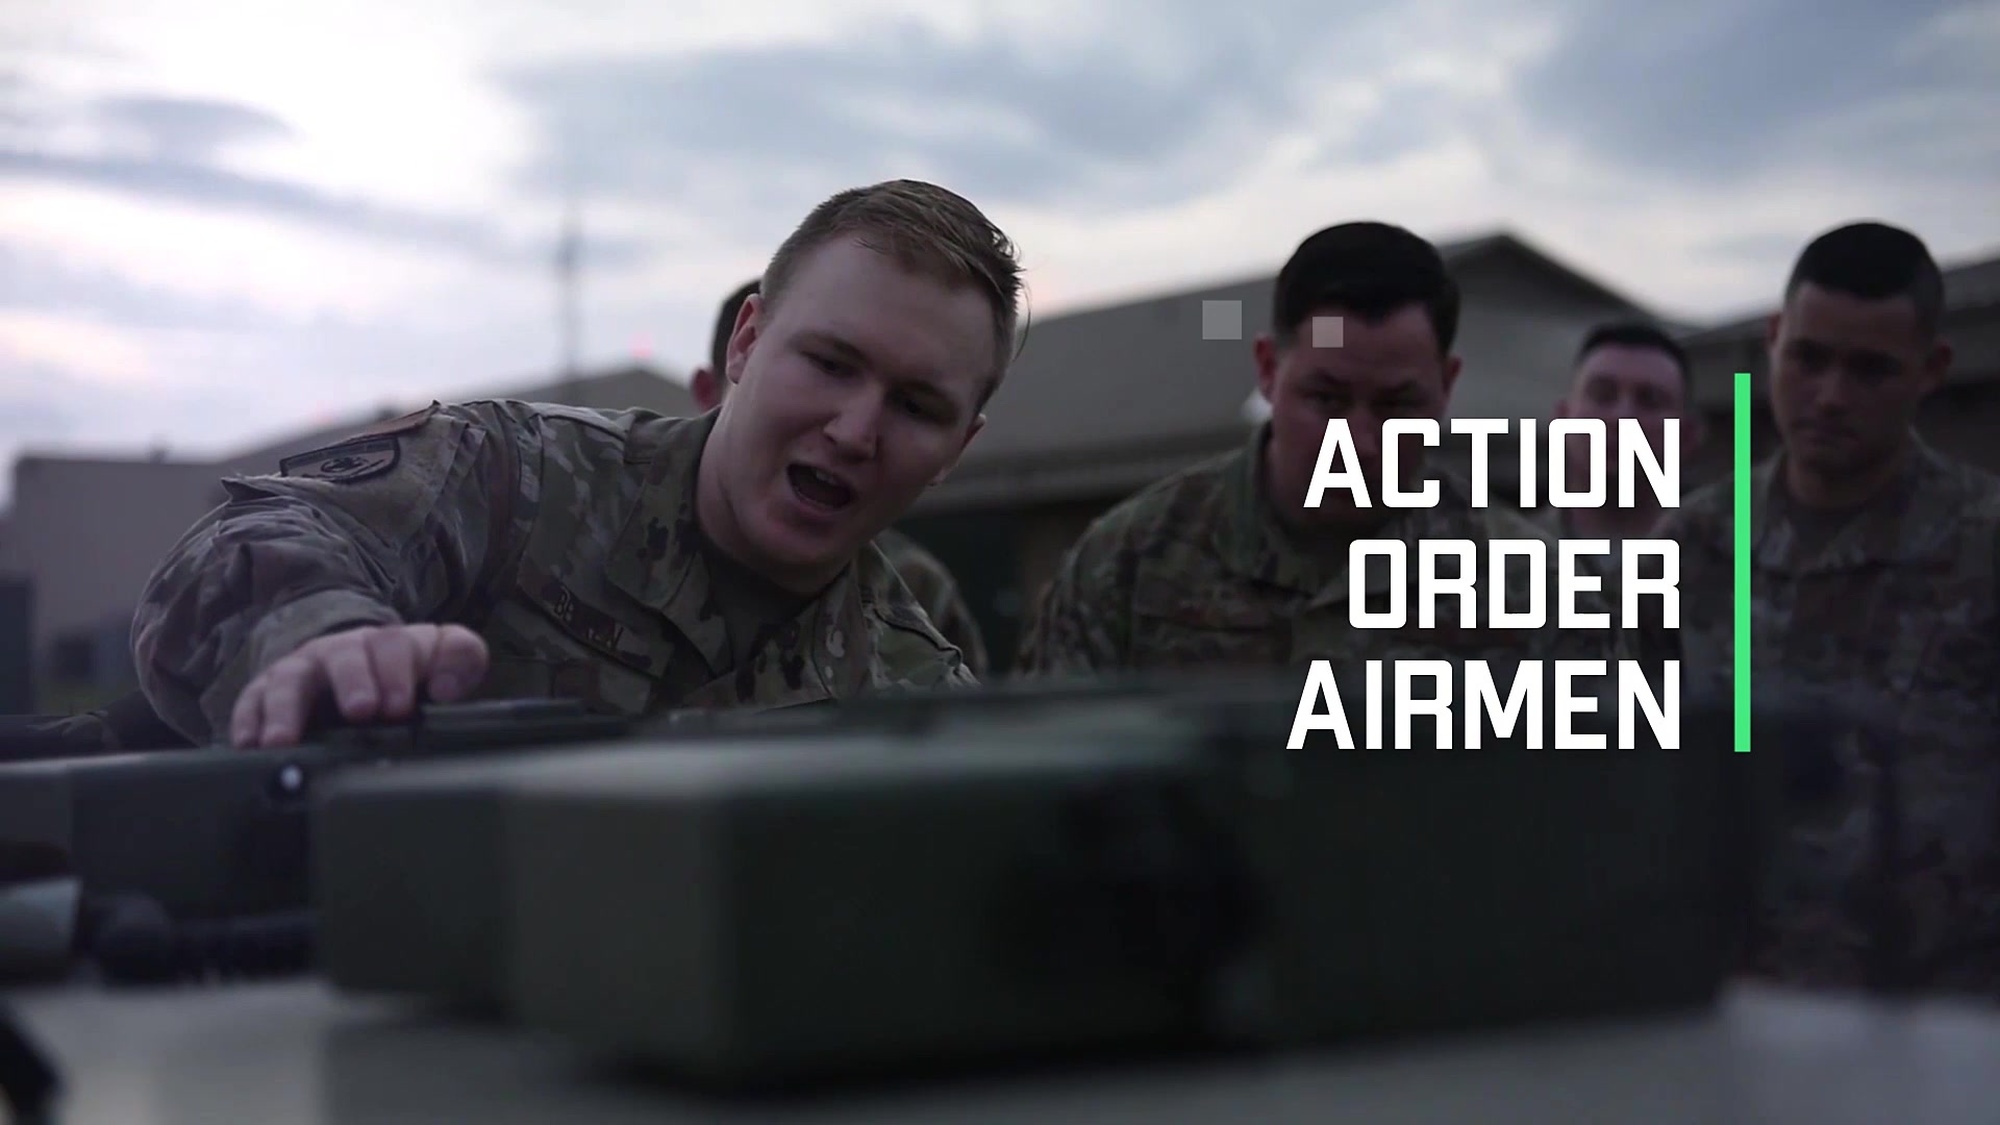 Part one if the Accelerate Change or Lose video series titled: Action Order Airmen